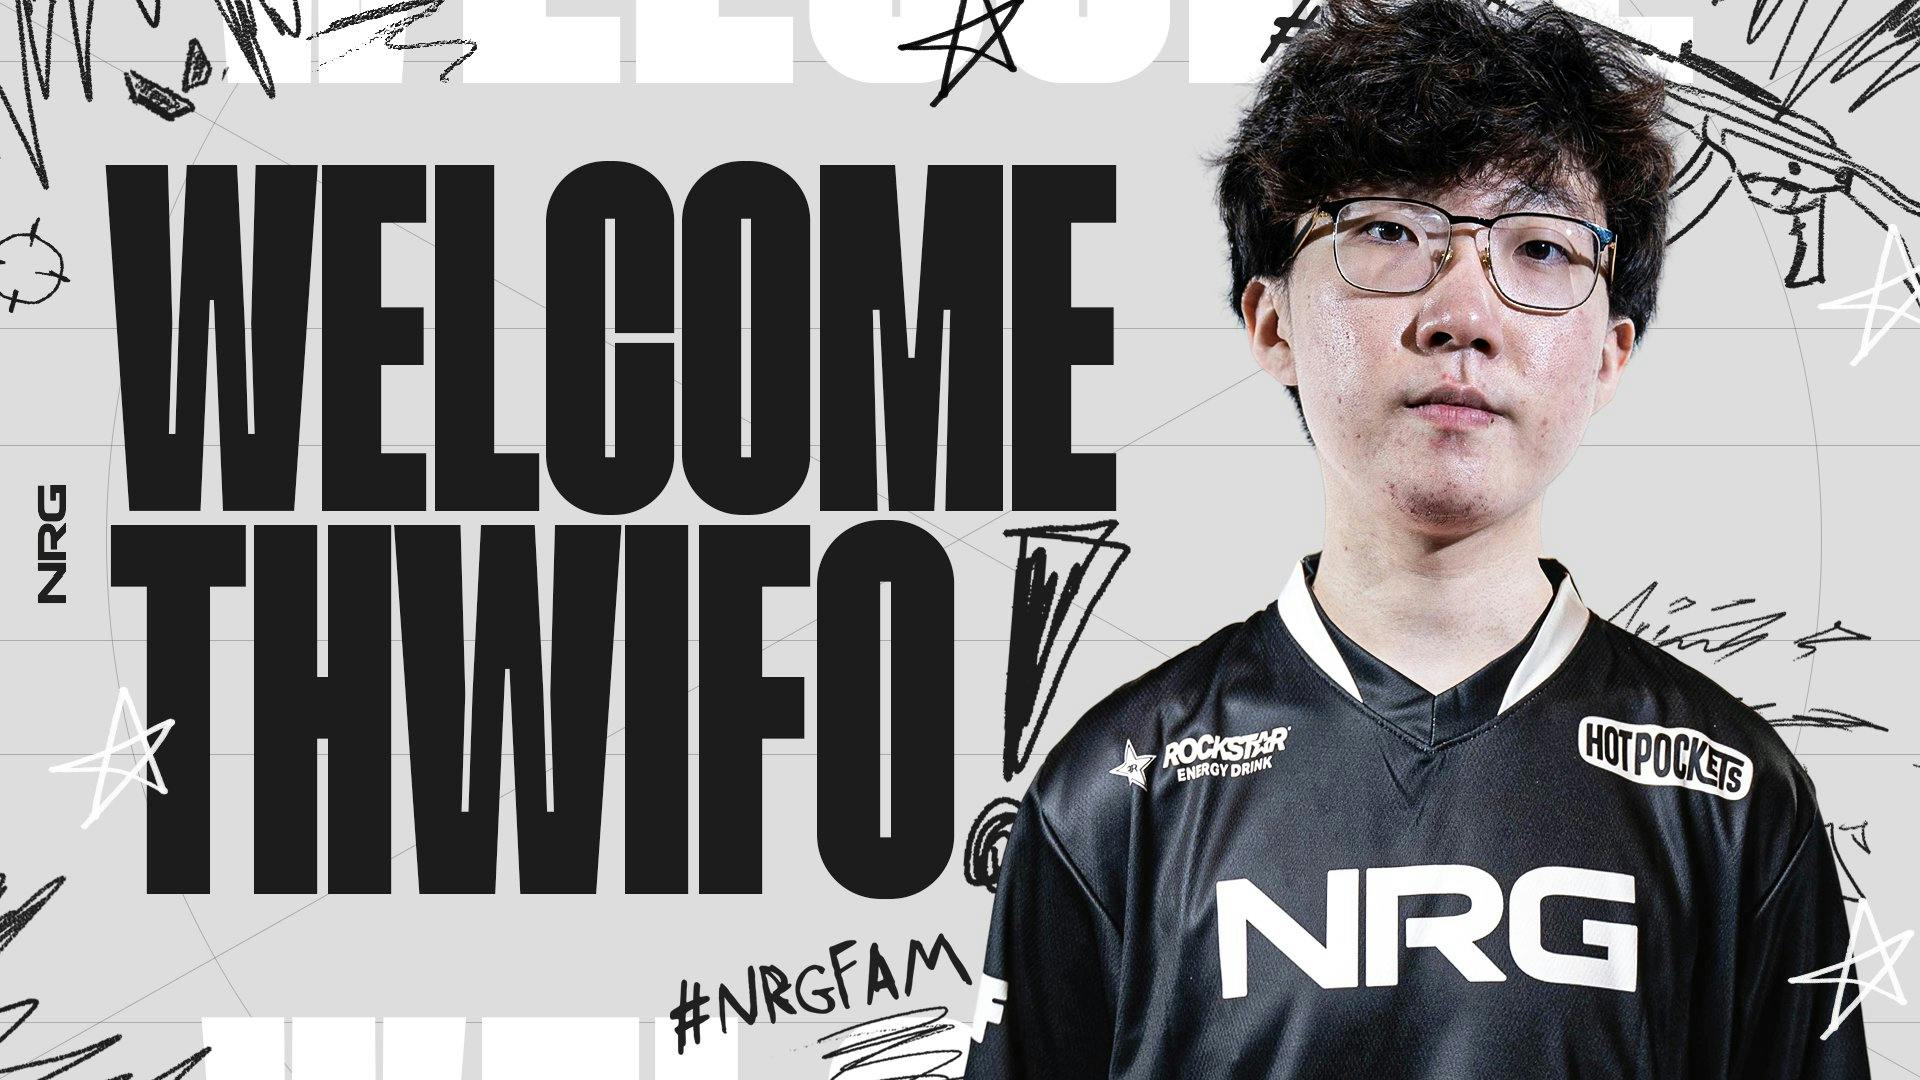 NRG completes its 2023 roster by signing thwifo as the 6th player